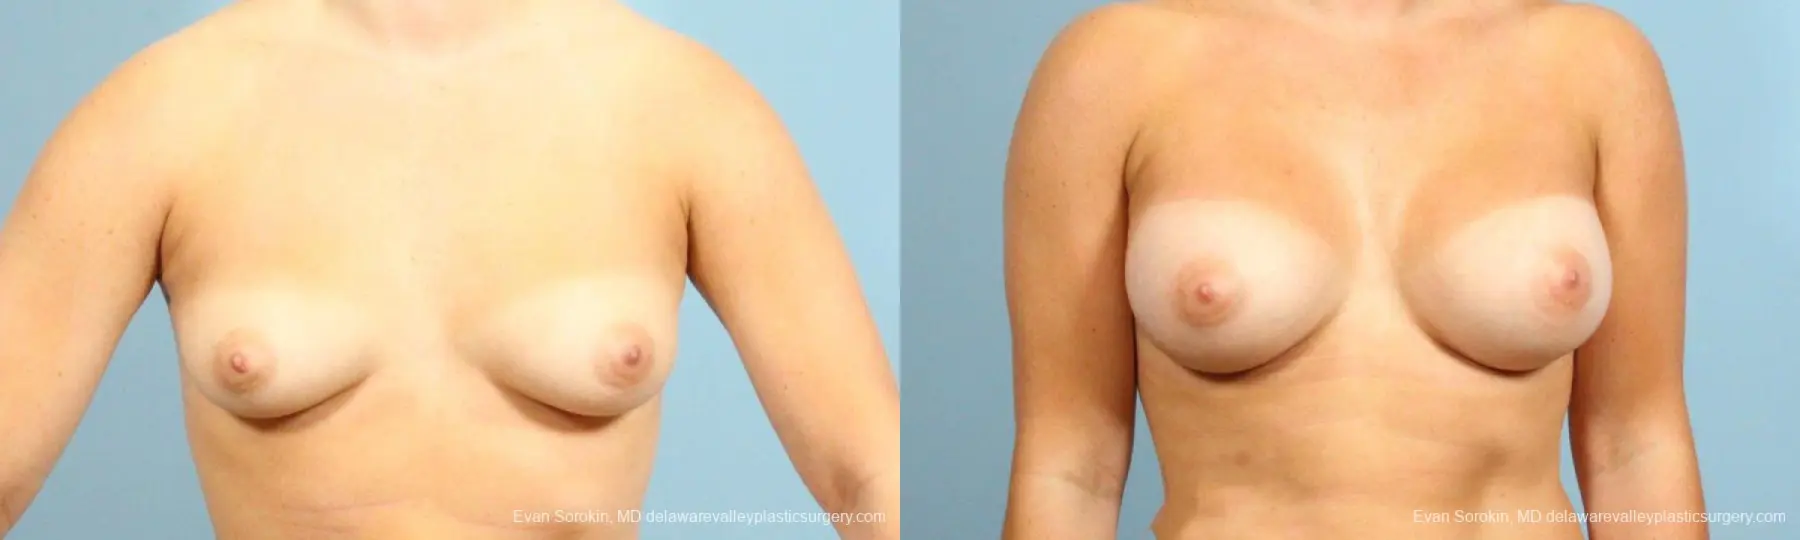 Philadelphia Breast Augmentation 8650 - Before and After 1